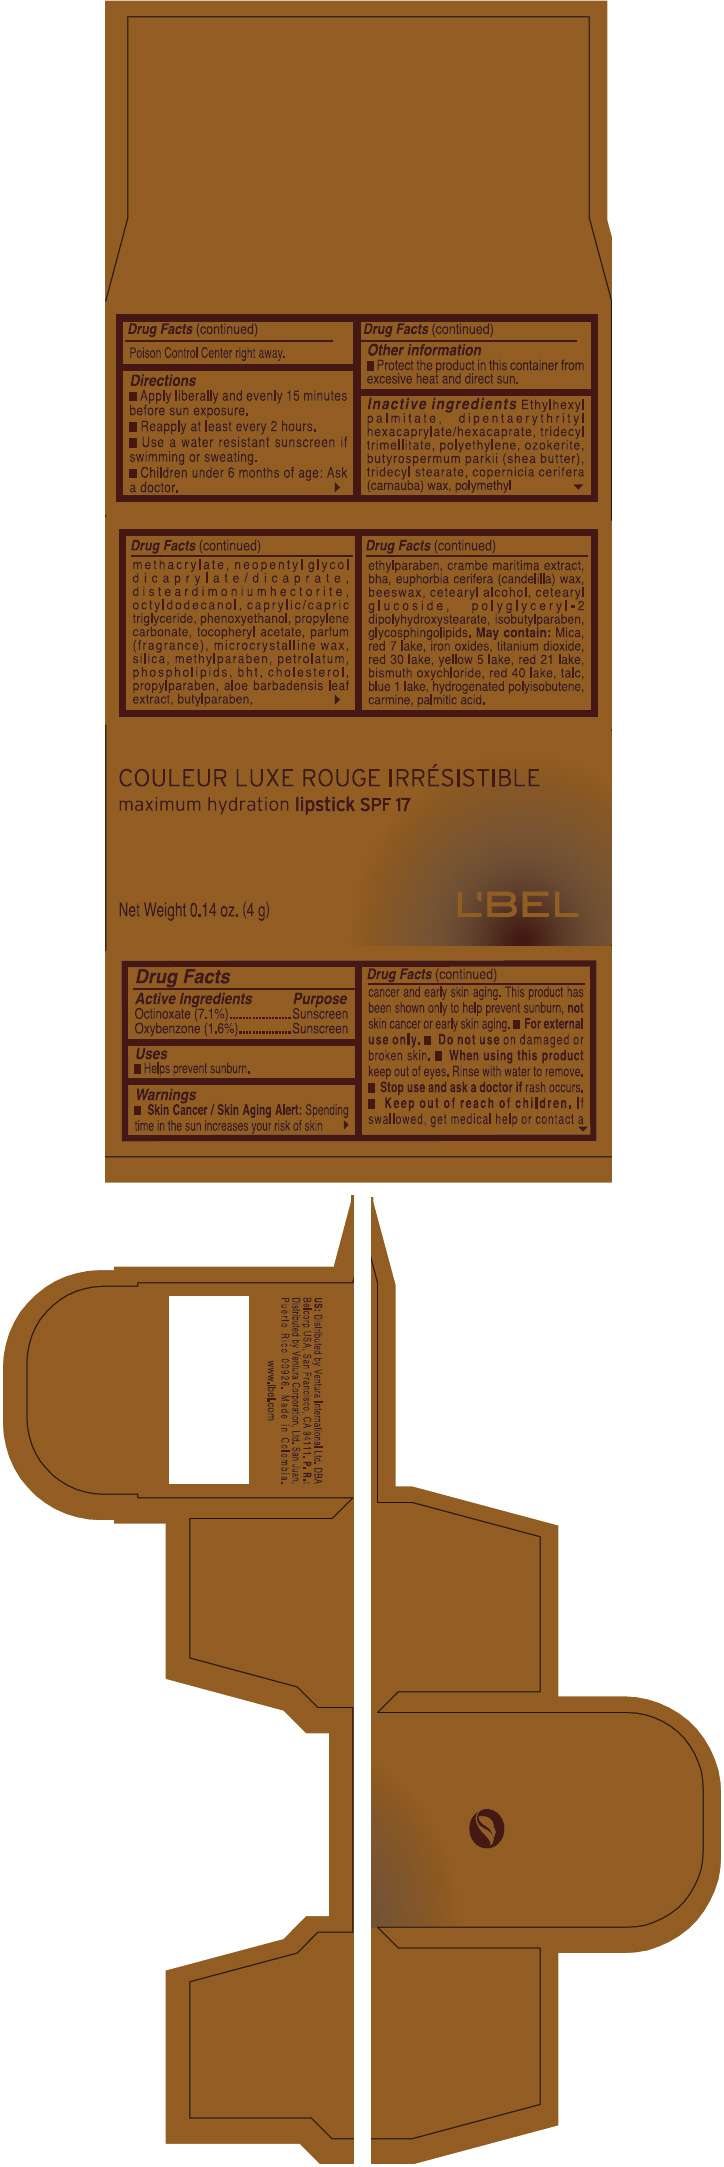 LBEL Couleur luxe rouge irresistible maximum hydration SPF 17